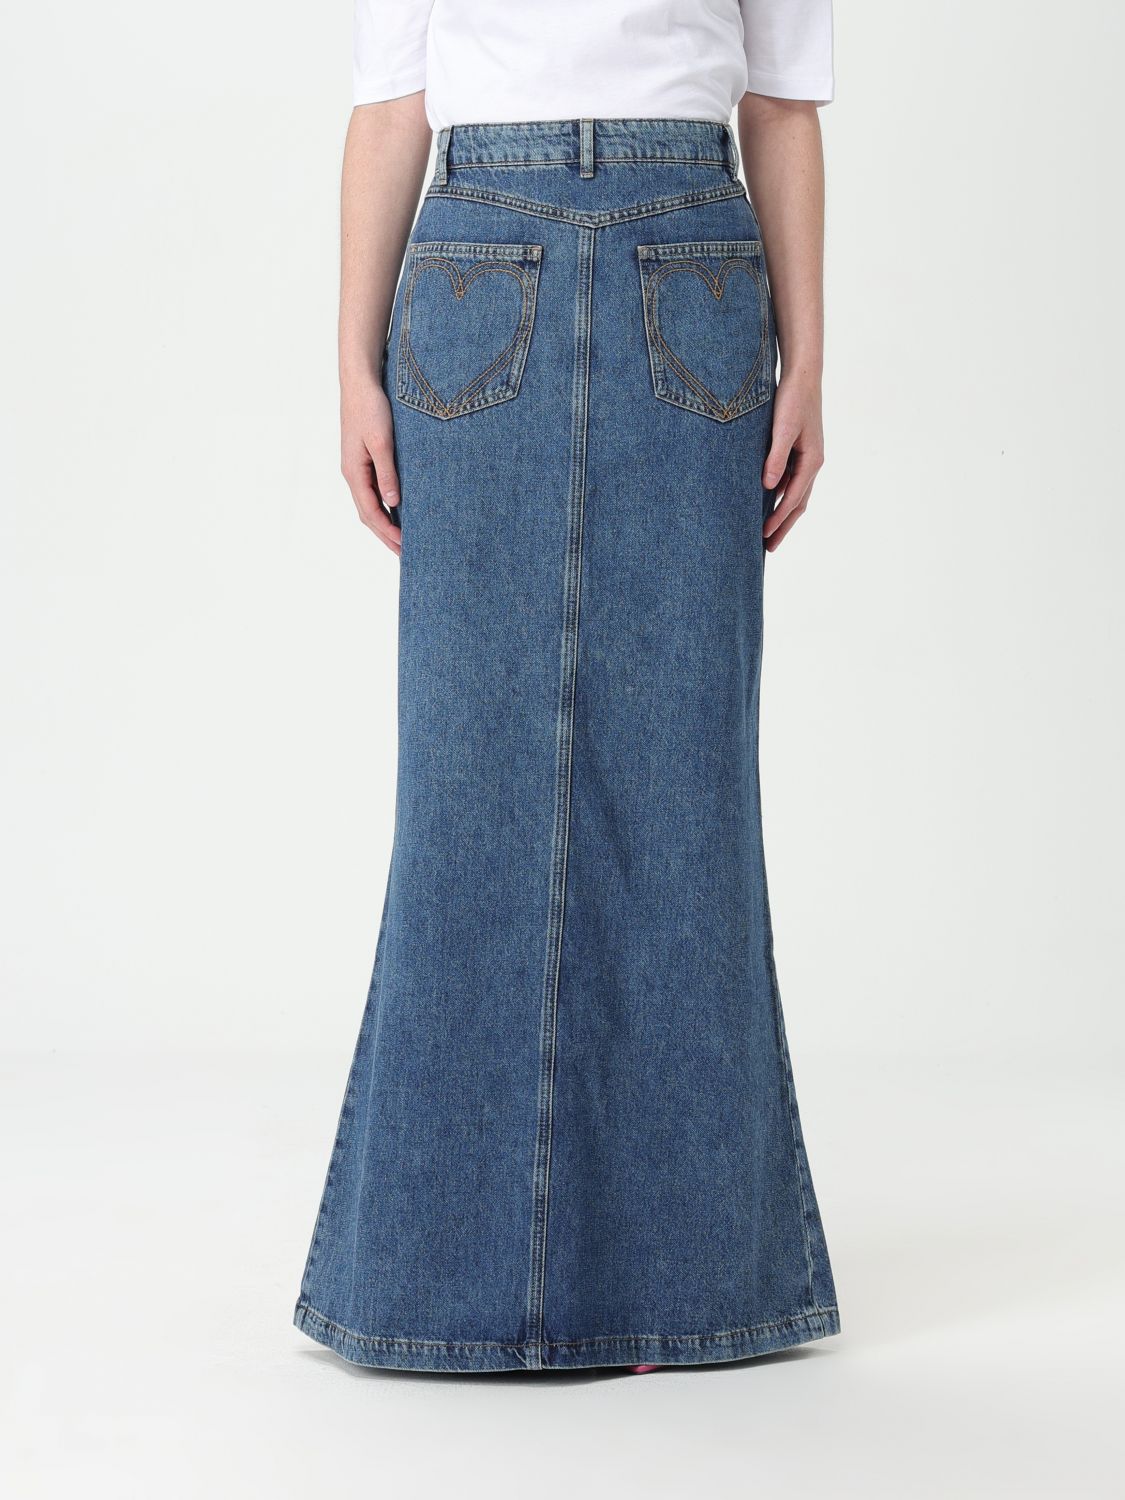 Moschino Jeans Skirt MOSCHINO JEANS Woman color Denim